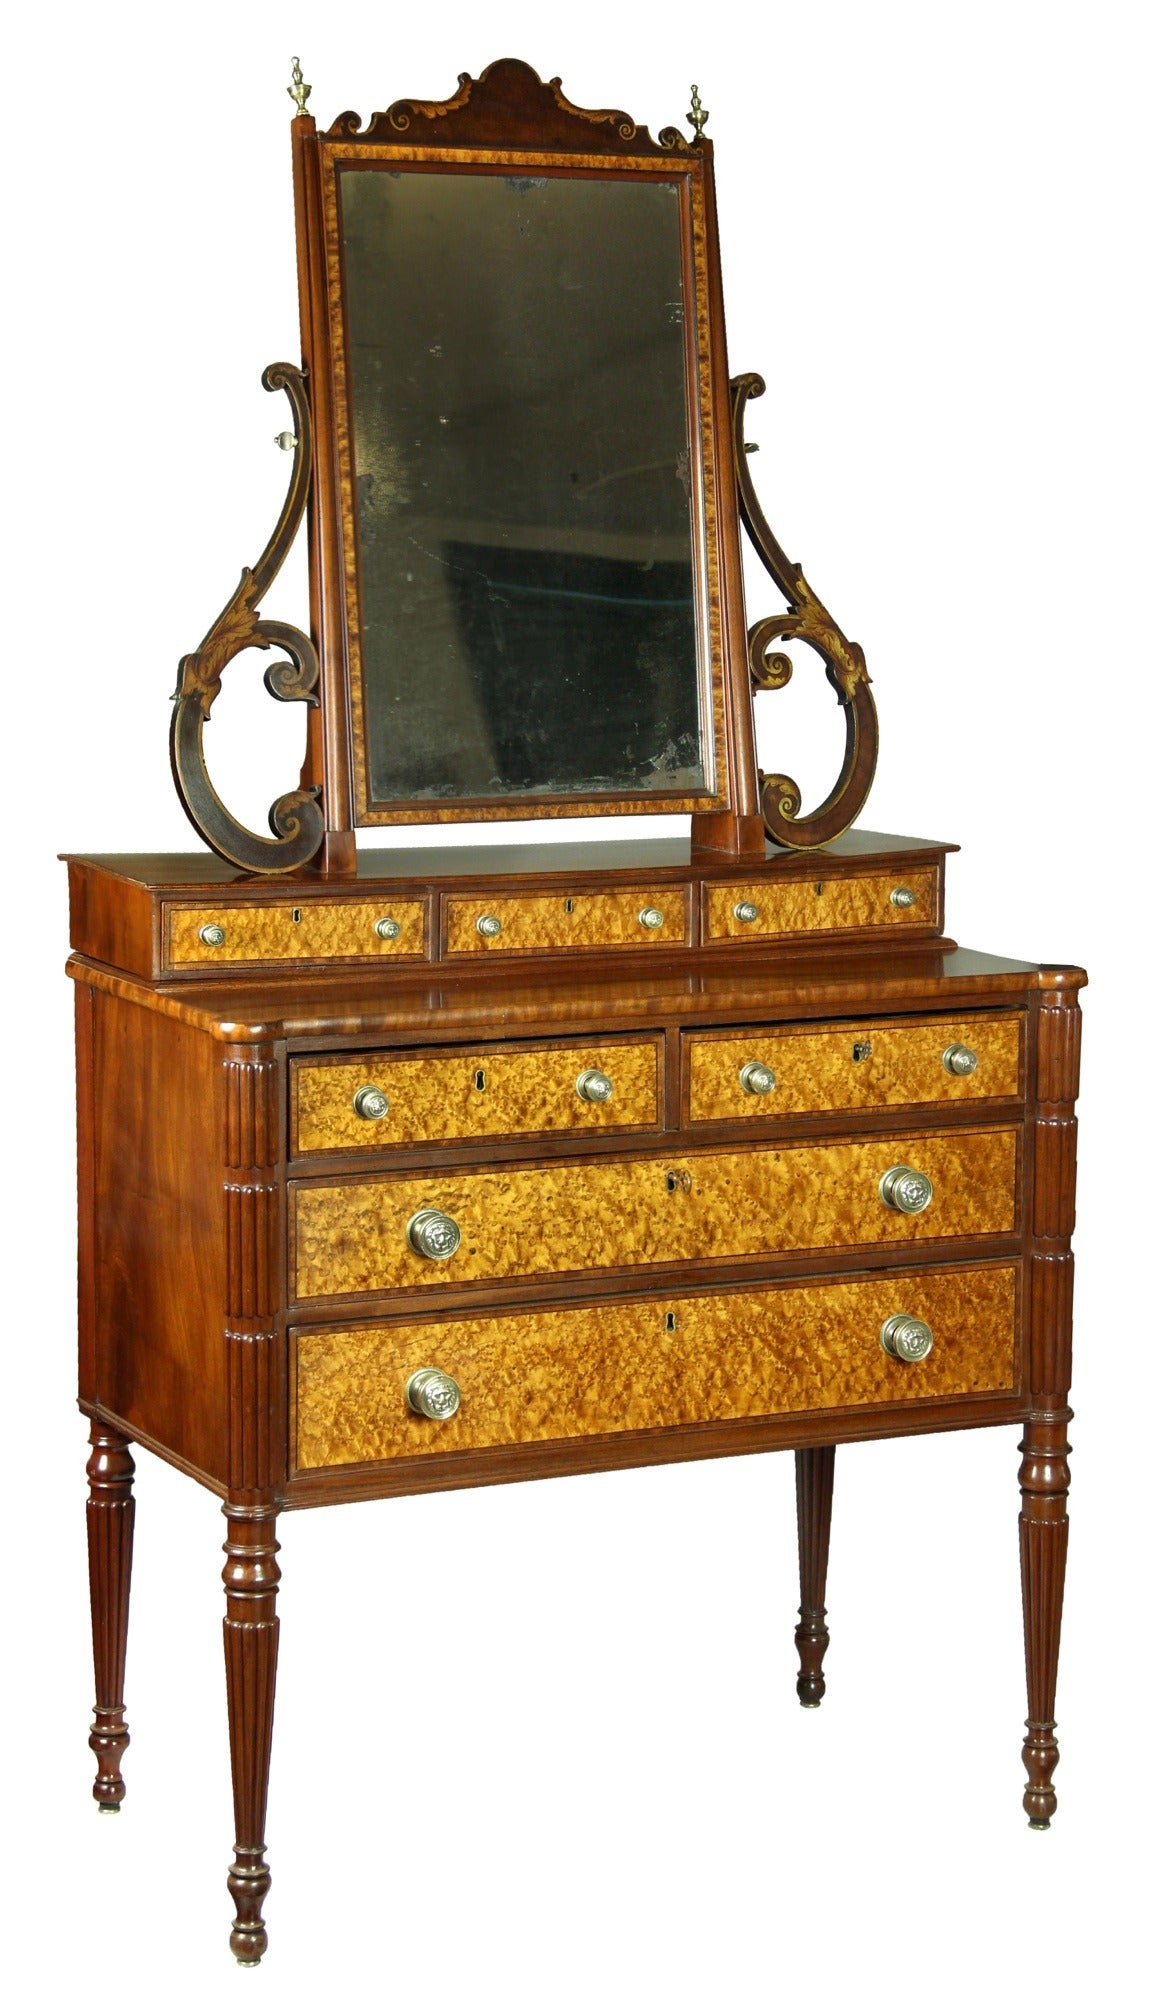 This is a very fine and desirable dressing table by, probably the finest cabinetmaker in Boston, one of the legends of Federal furniture. A very closely related example is at the MFA, and illustrated in American Furniture in the Museum of Fine Arts,